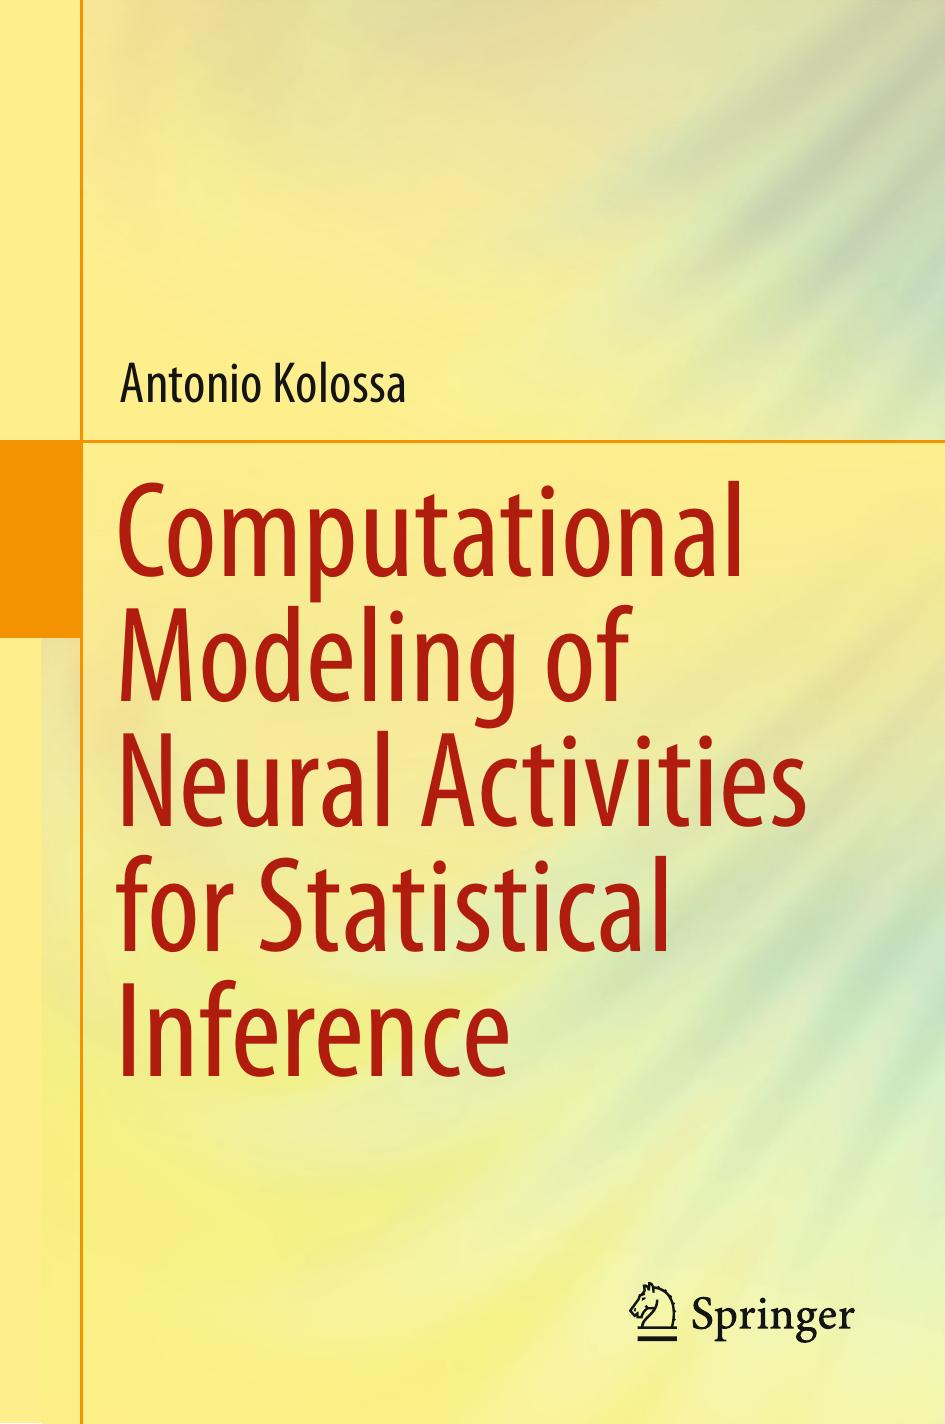 Computational Modeling of Neural Activities for Statistical Inference by Antonio Kolossa